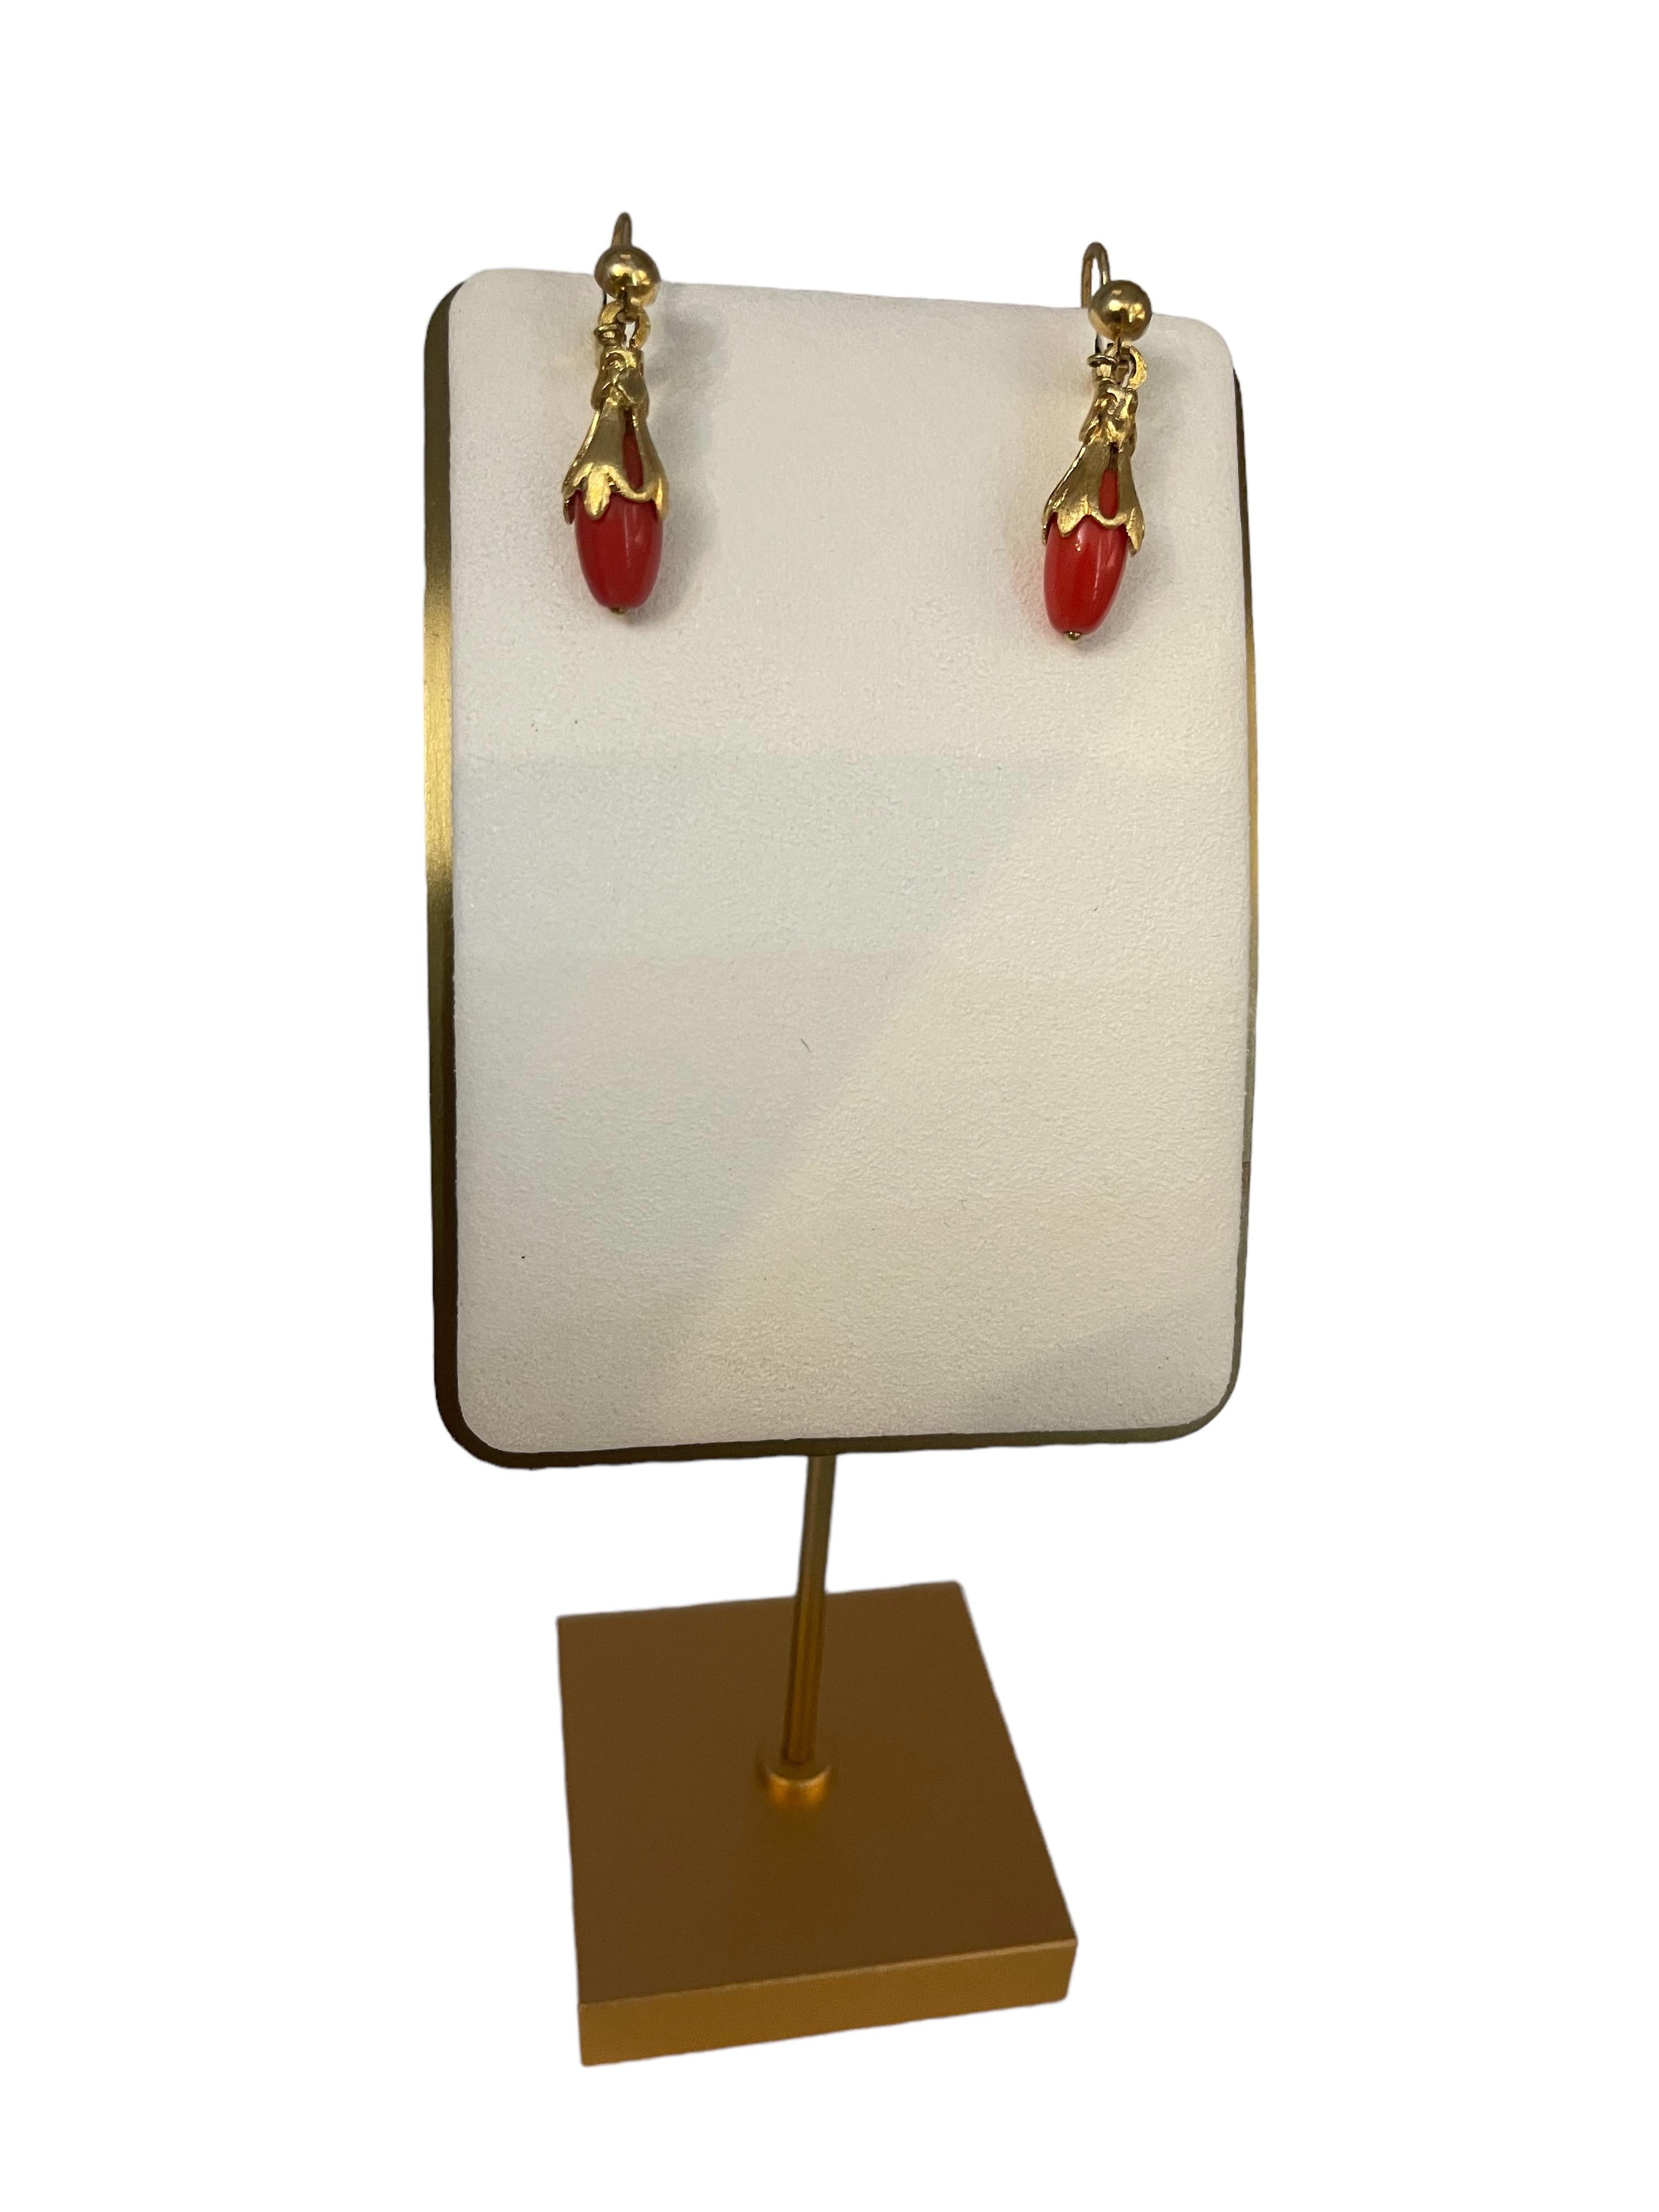 This is a Corletto Pair of 18K yellow gold Red Coral Drops Earrings. The coral is shaped as long tear drops mounted in 18K yellow gold garland of leaves with pression back. Both earrings are hallmarked Corletto 18K Italy.